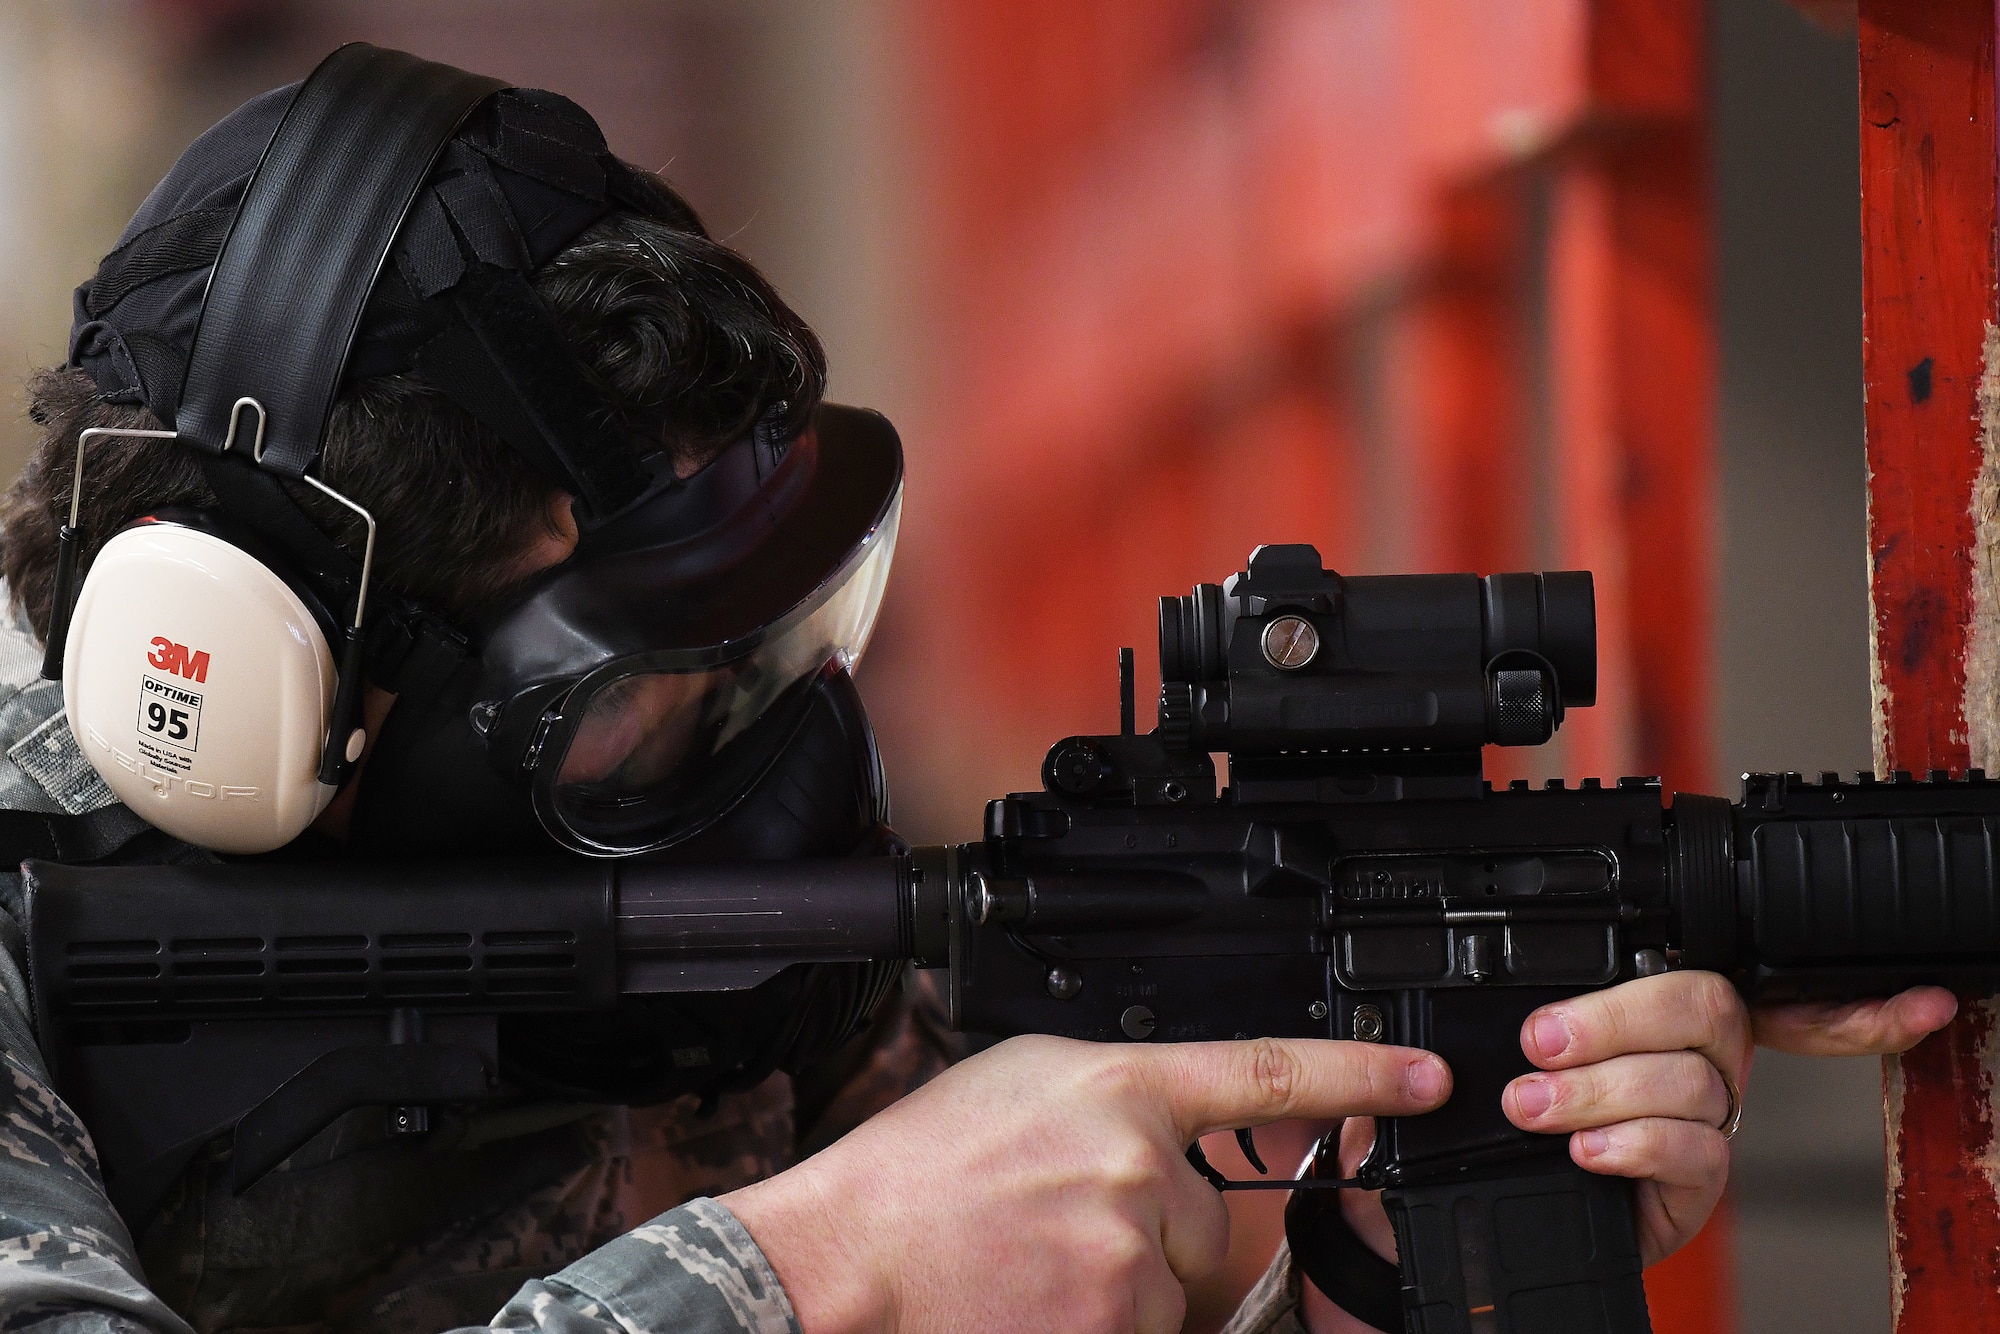 A security forces augmentee in training fires an M4 Carbine assault rifle during training at Royal Air Force Feltwell, England, April 17, 2020. Augmentees provide essential support to the security force's mission to protect, defend, and fight to enable Air Force, joint and allied missions. (U.S. Air Force photo by Senior Airman Shanice Williams-Jones)